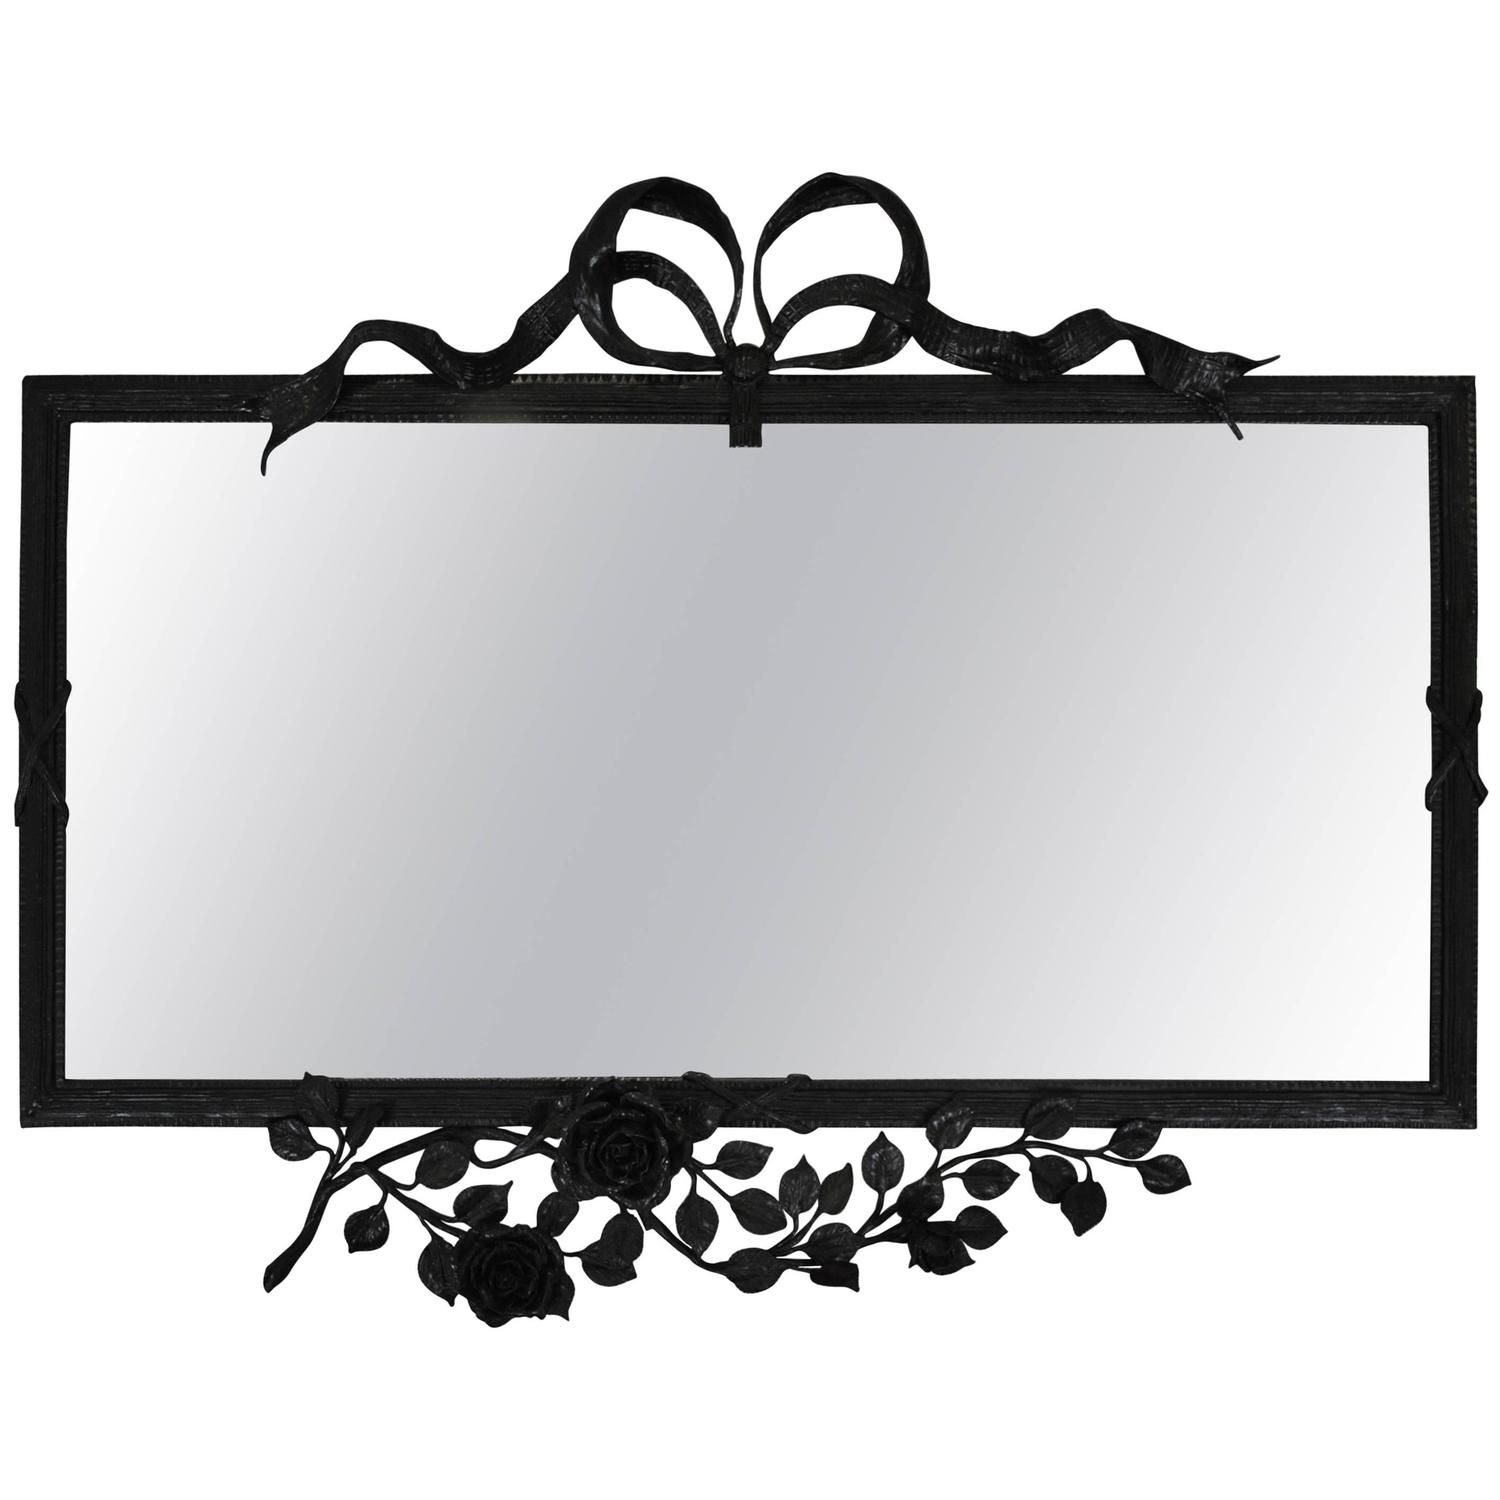 Wrought Iron Mirrors 92 For Sale At 1stdibs For Black Wrought Iron Mirror (View 7 of 15)